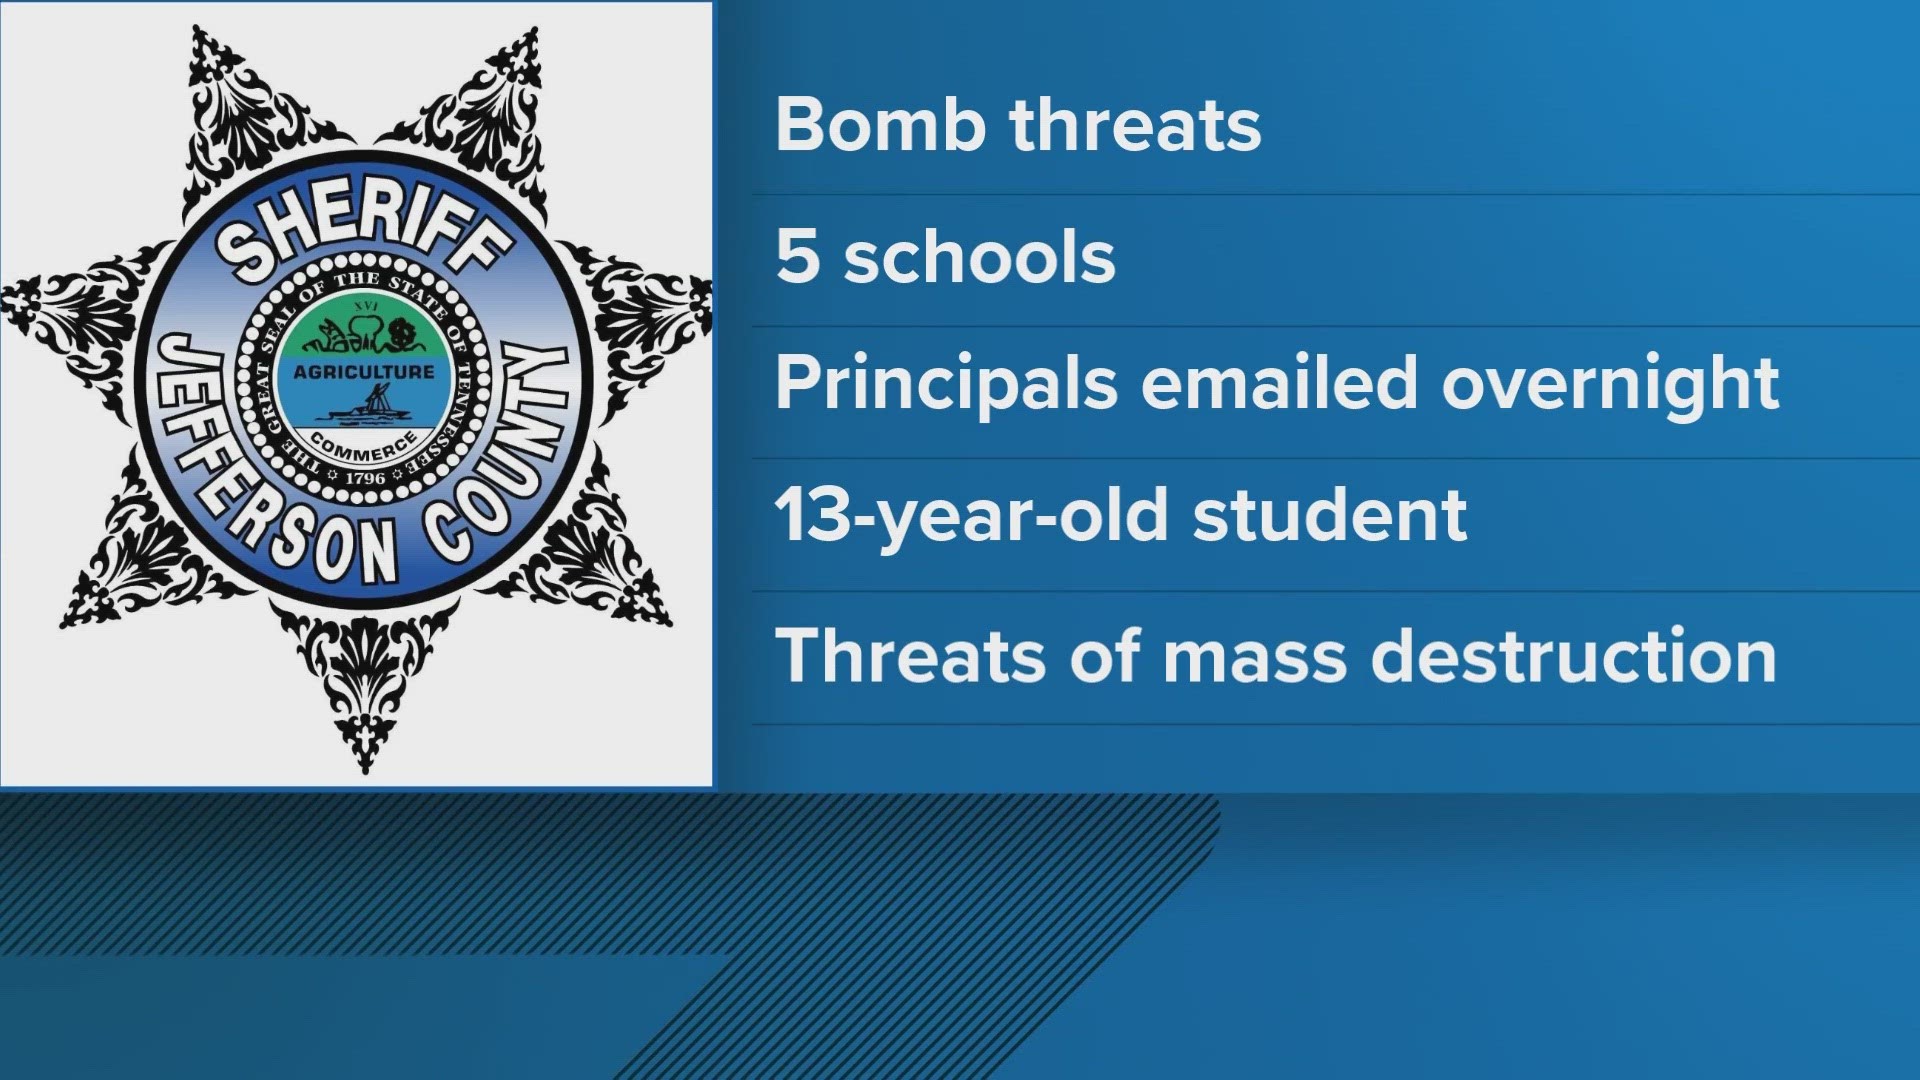 Sheriff's Deputies say the threats were emailed to principals overnight. School Resource Officers immediately started sweeping schools for anything suspicious.